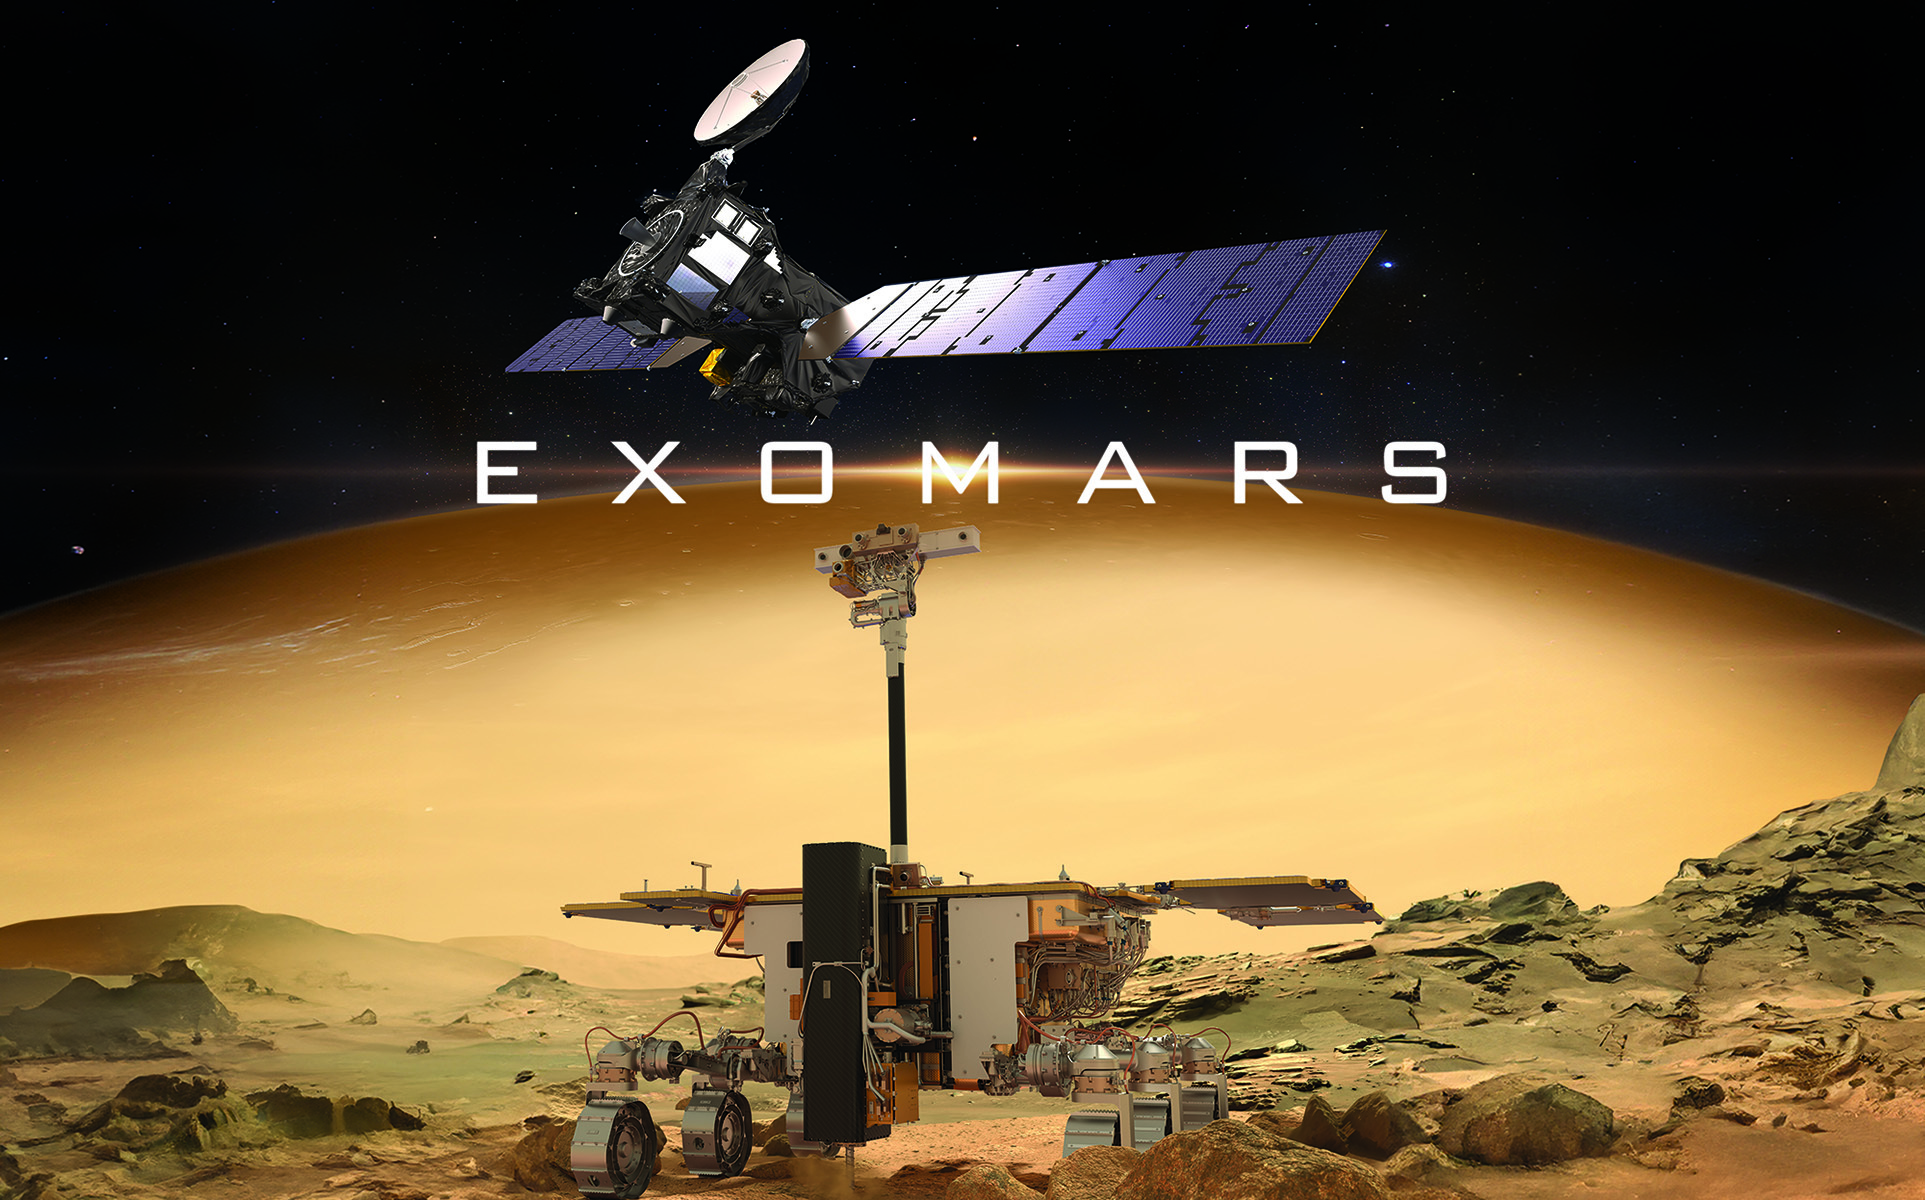 exomars-rover-and-tgo-with-text-cthales-alenia-space-master-images-programmes